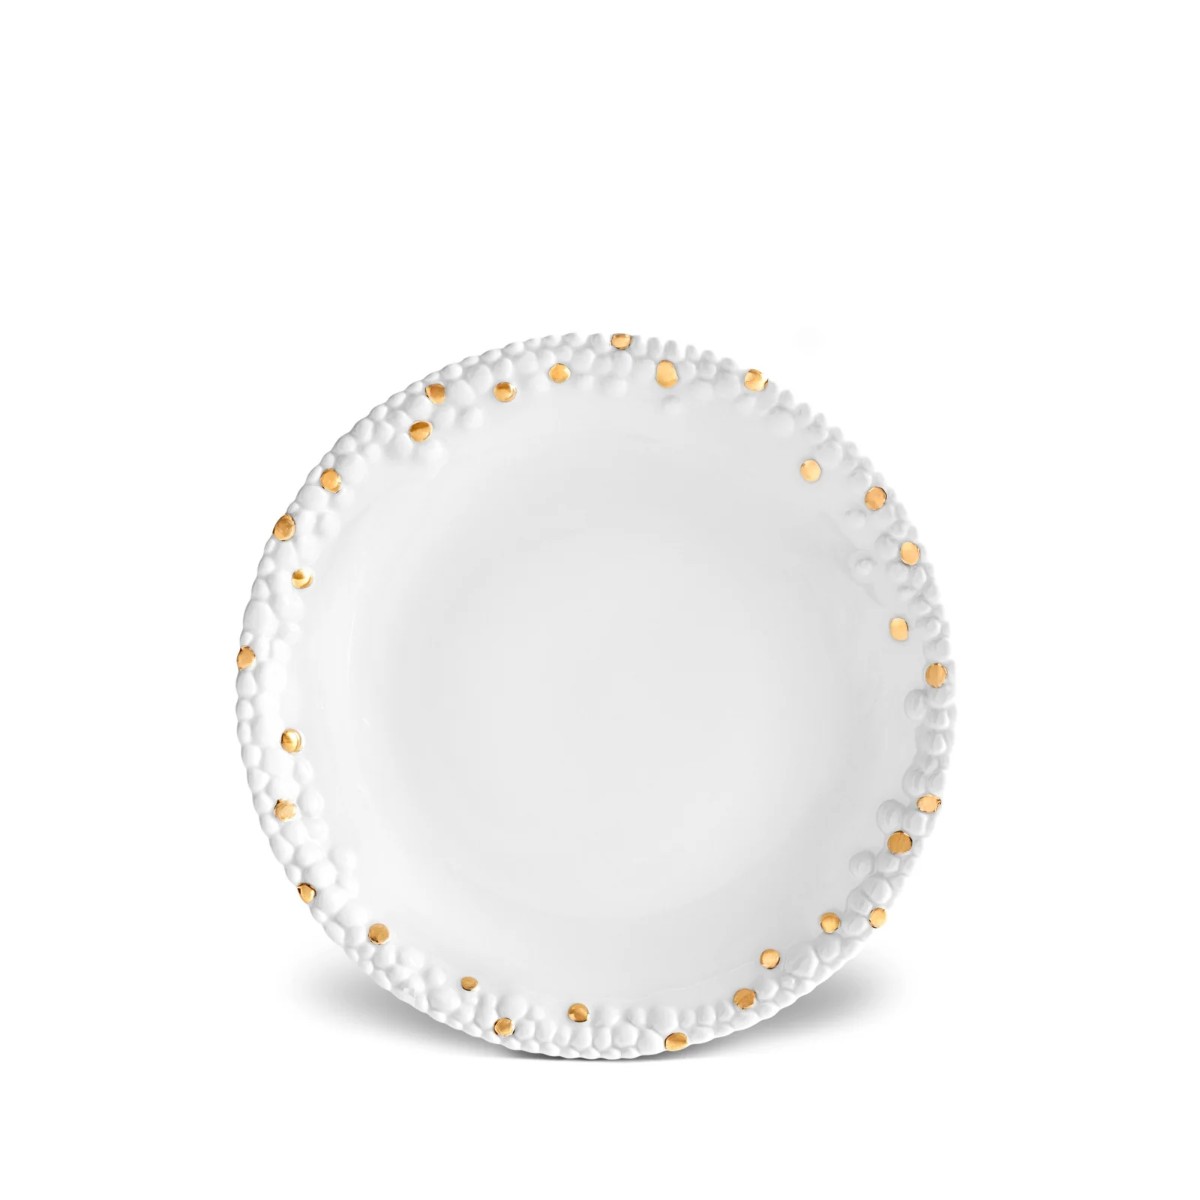 L’Objet | Haas Mojave Bread + Butter Plate | White and Gold